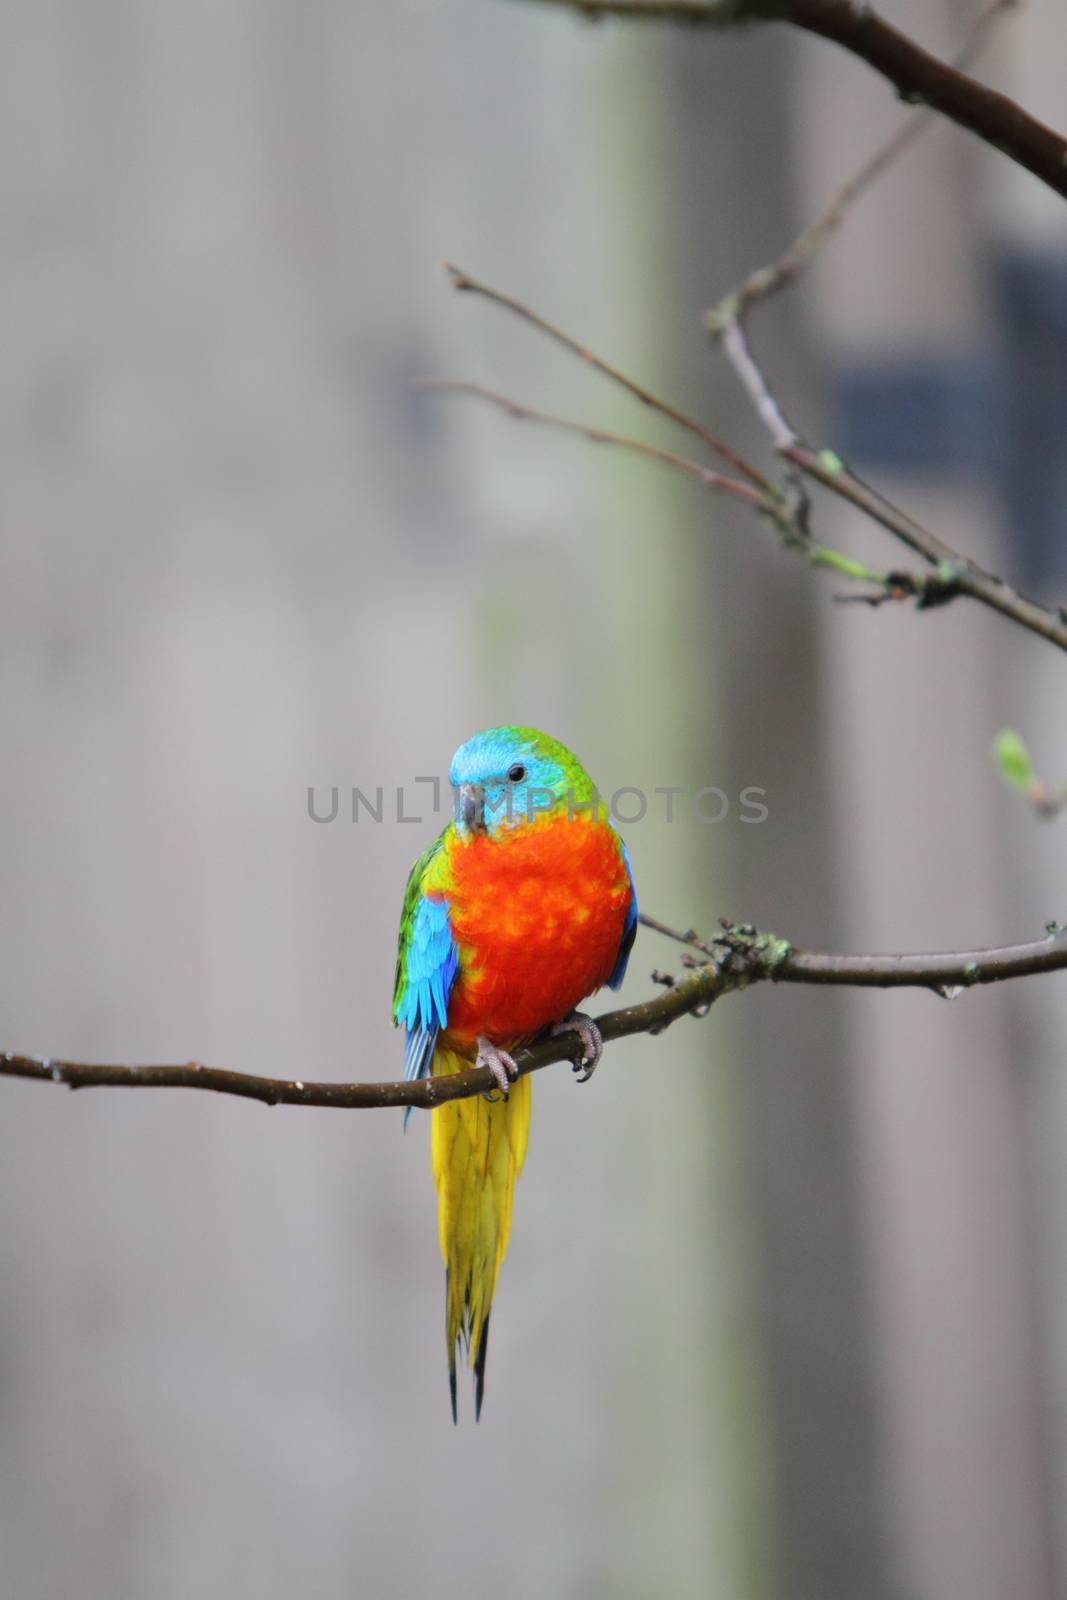 Turquoise parrot by mitzy